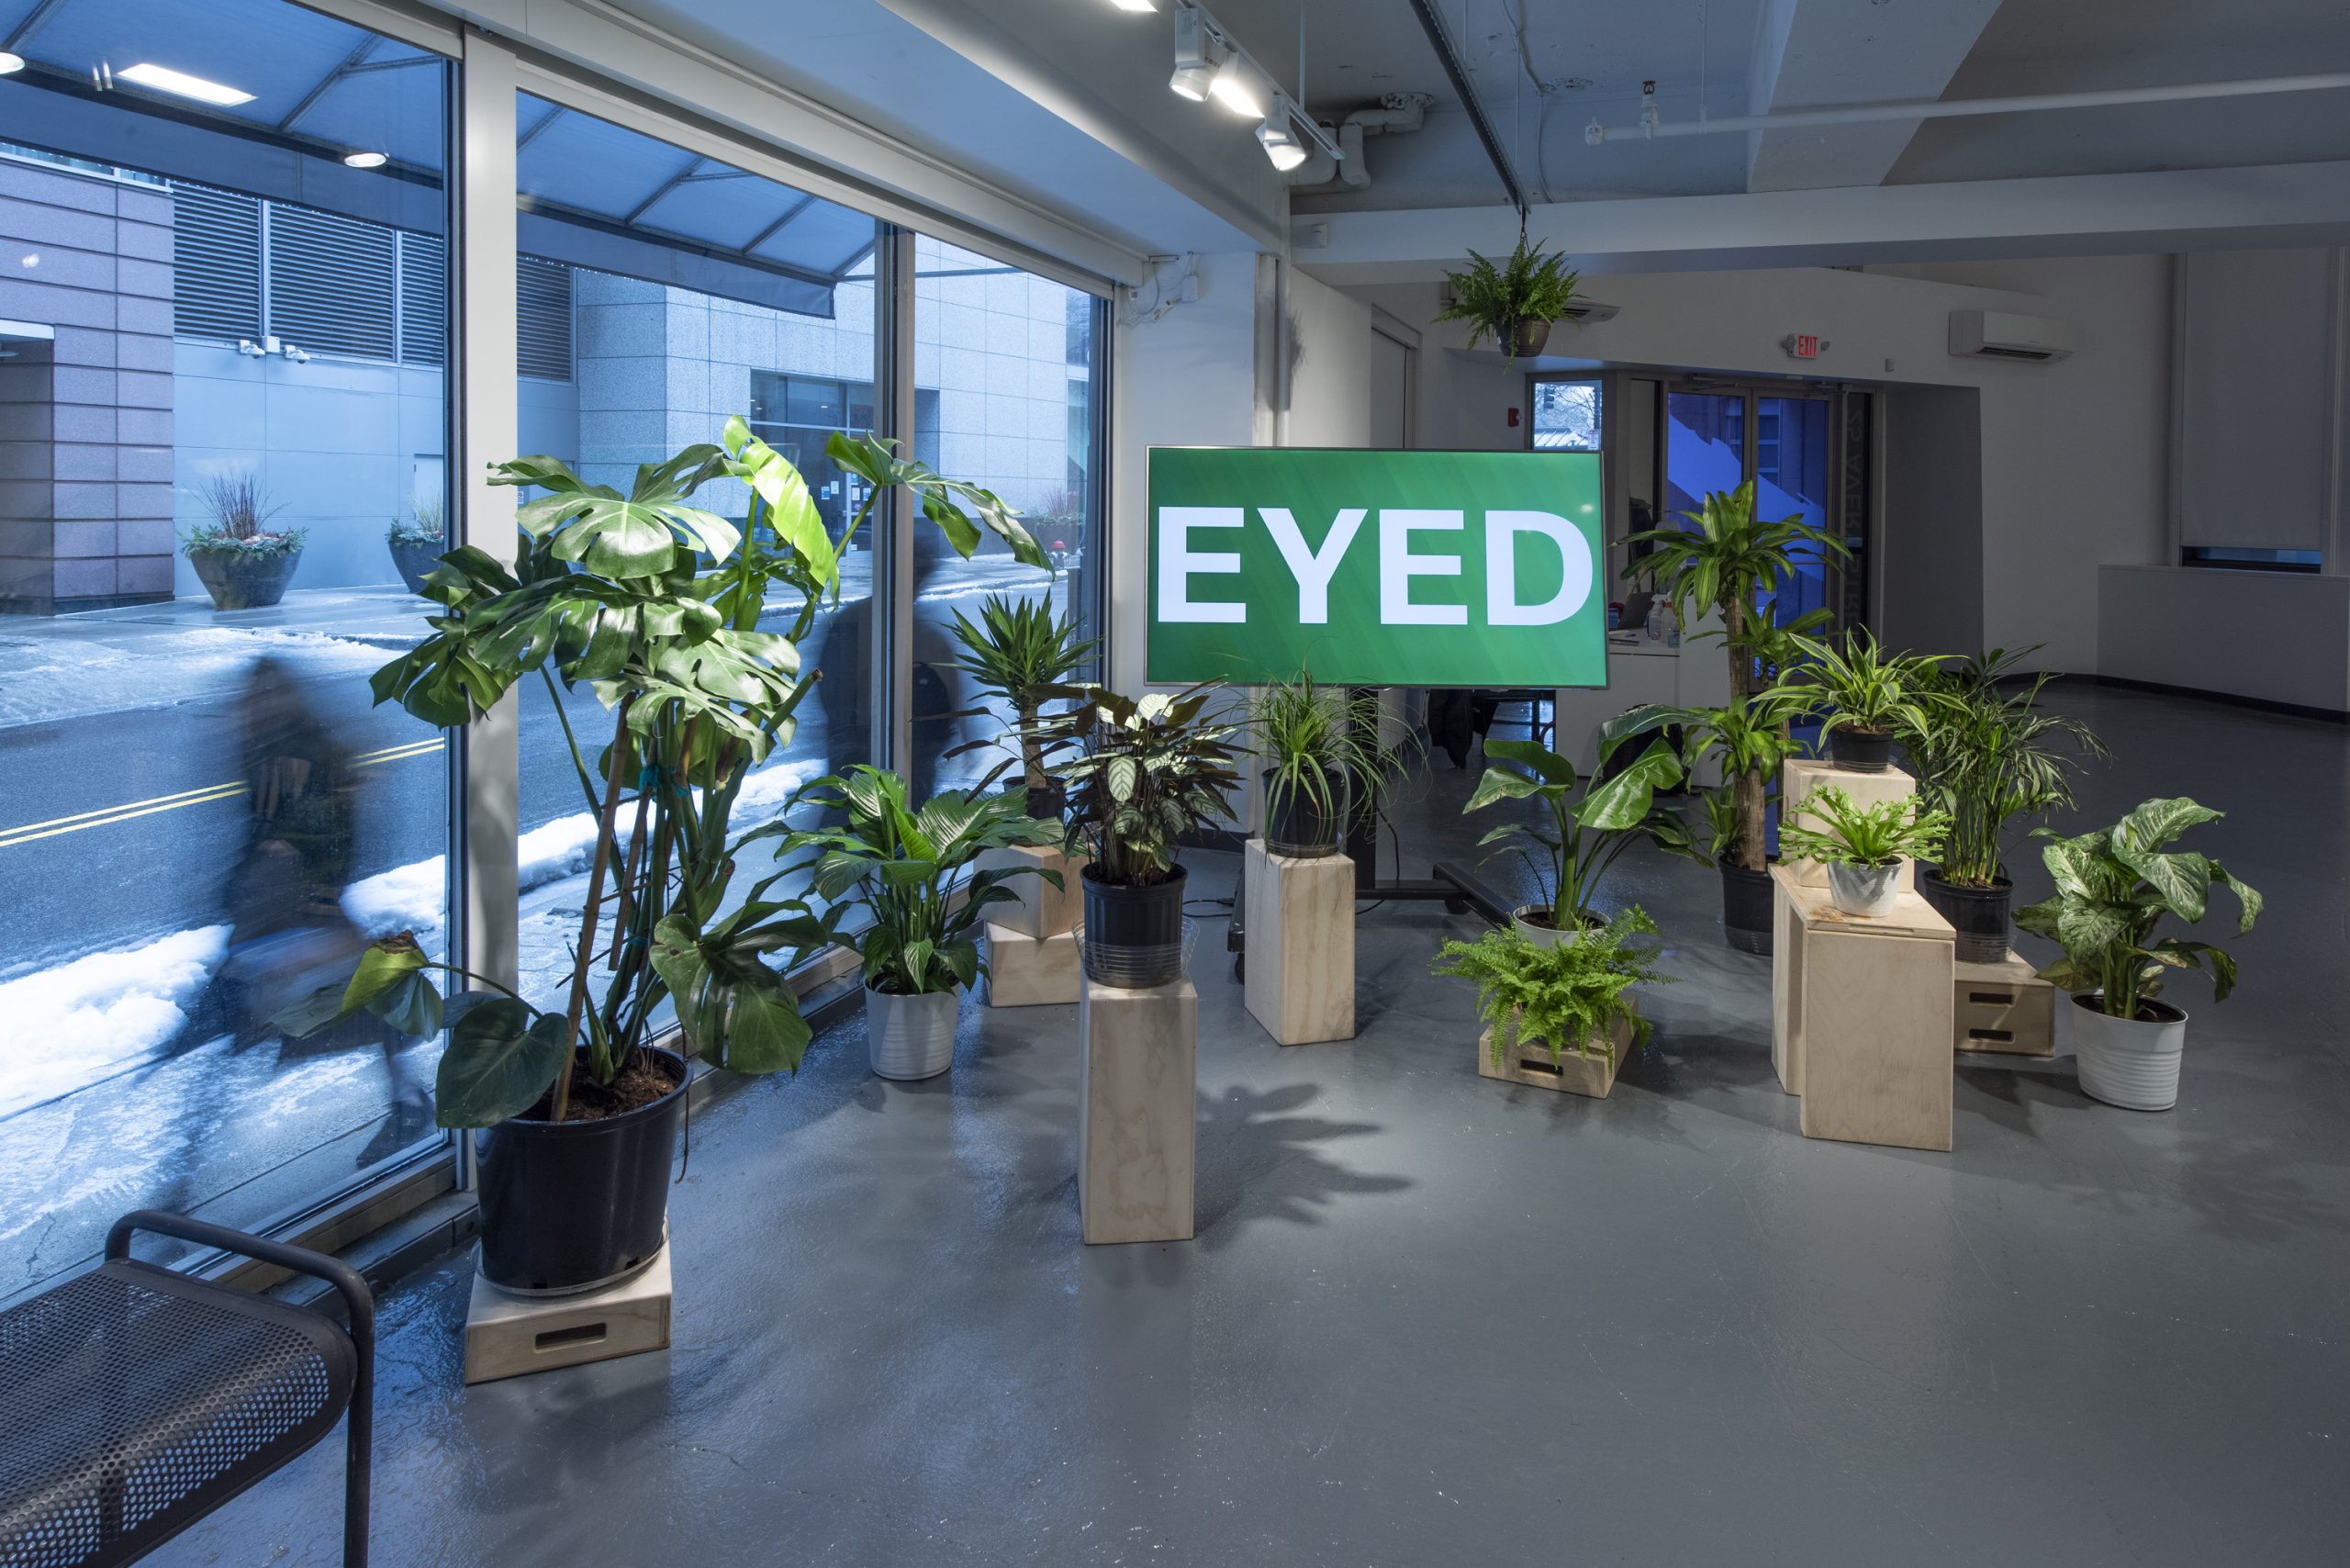 TV saying "eyed" surrounded by plants